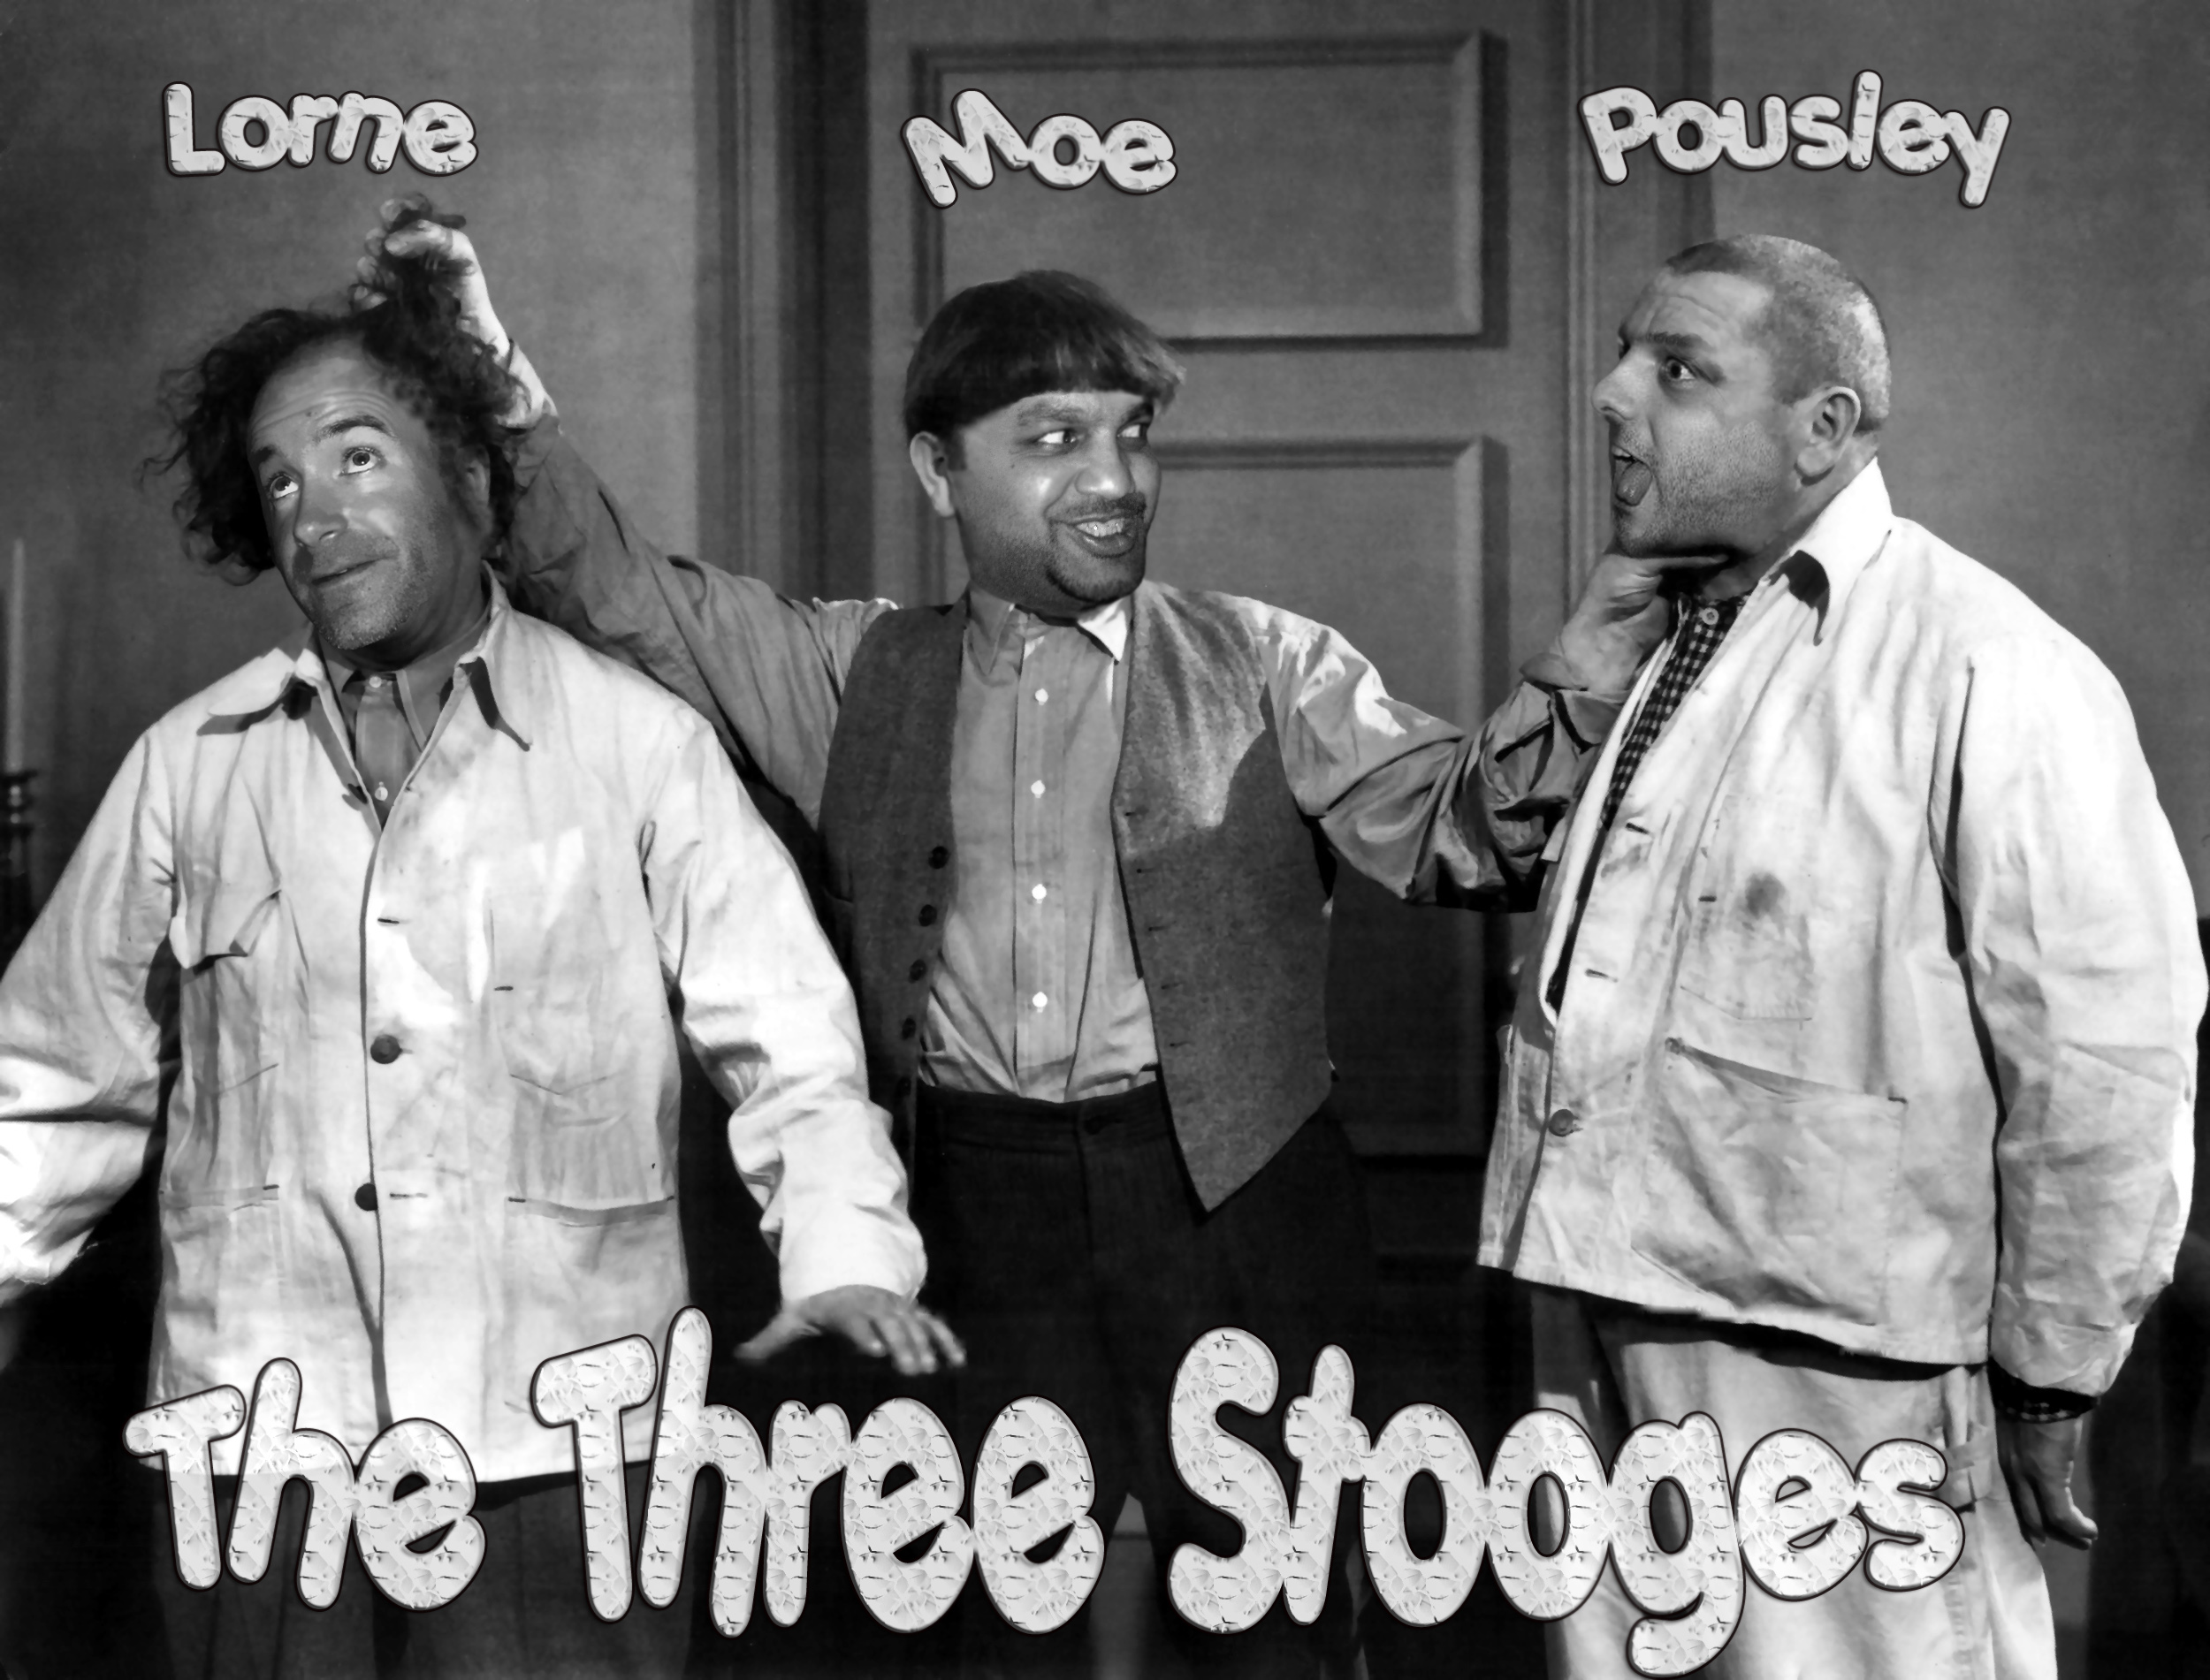 Lorne Gump in The Three Stooges